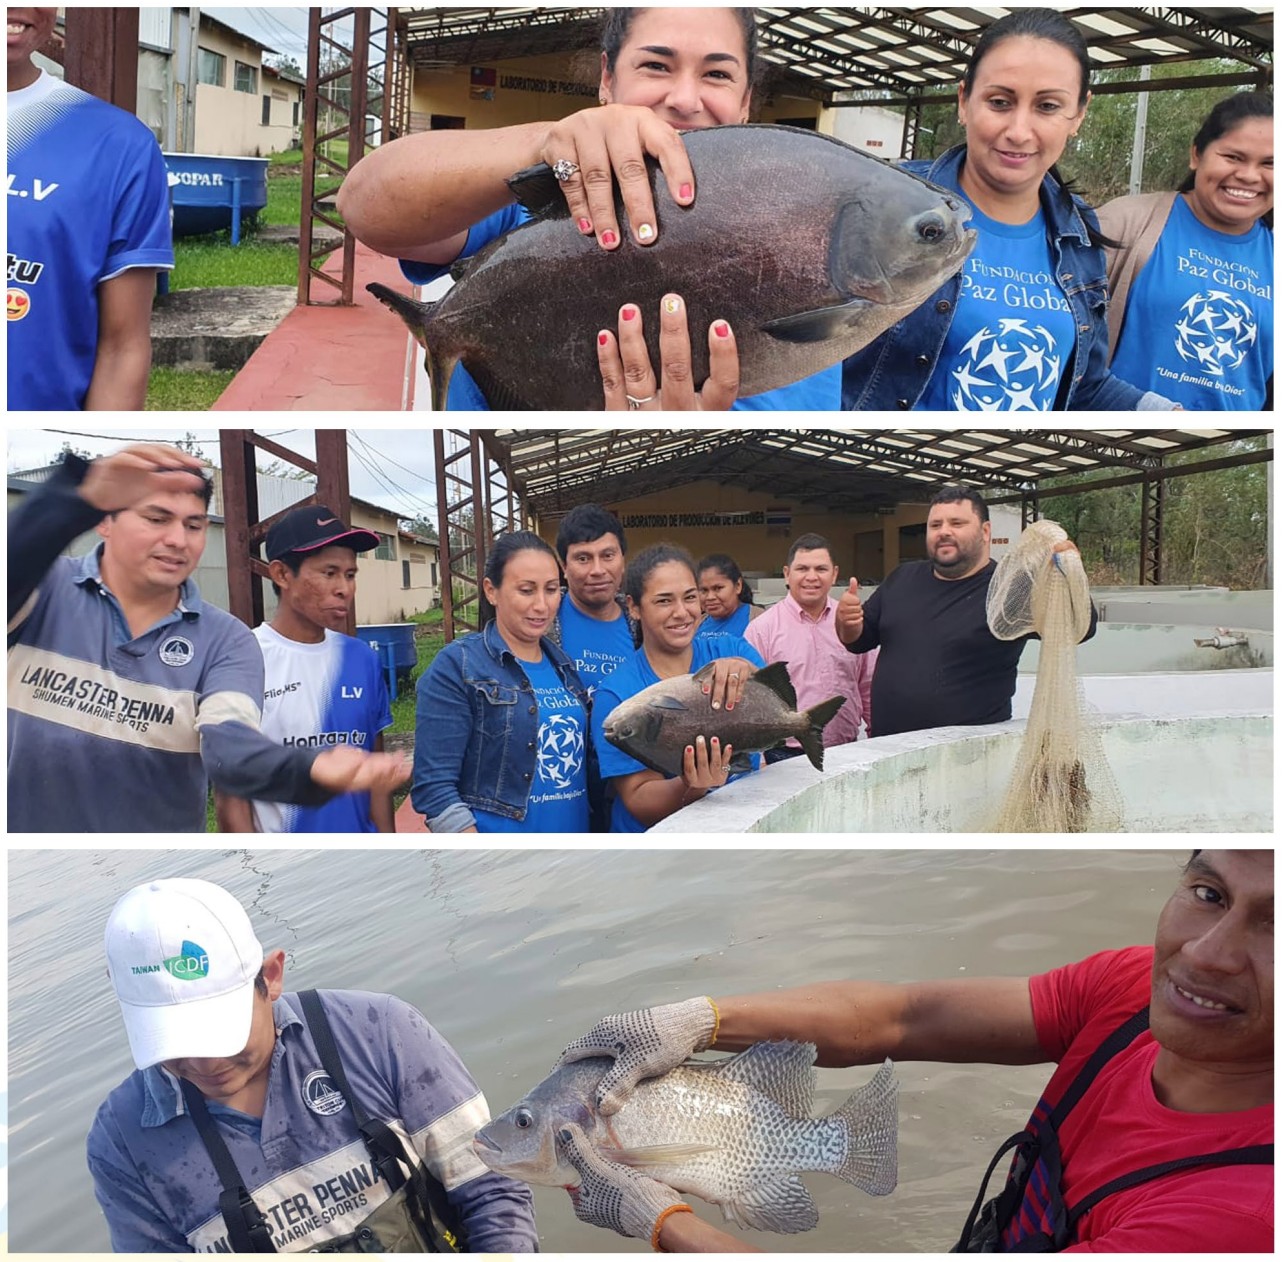 Global Peace Foundation | Bringing Sustainable Development to Paraguay Communities through Fish Farming